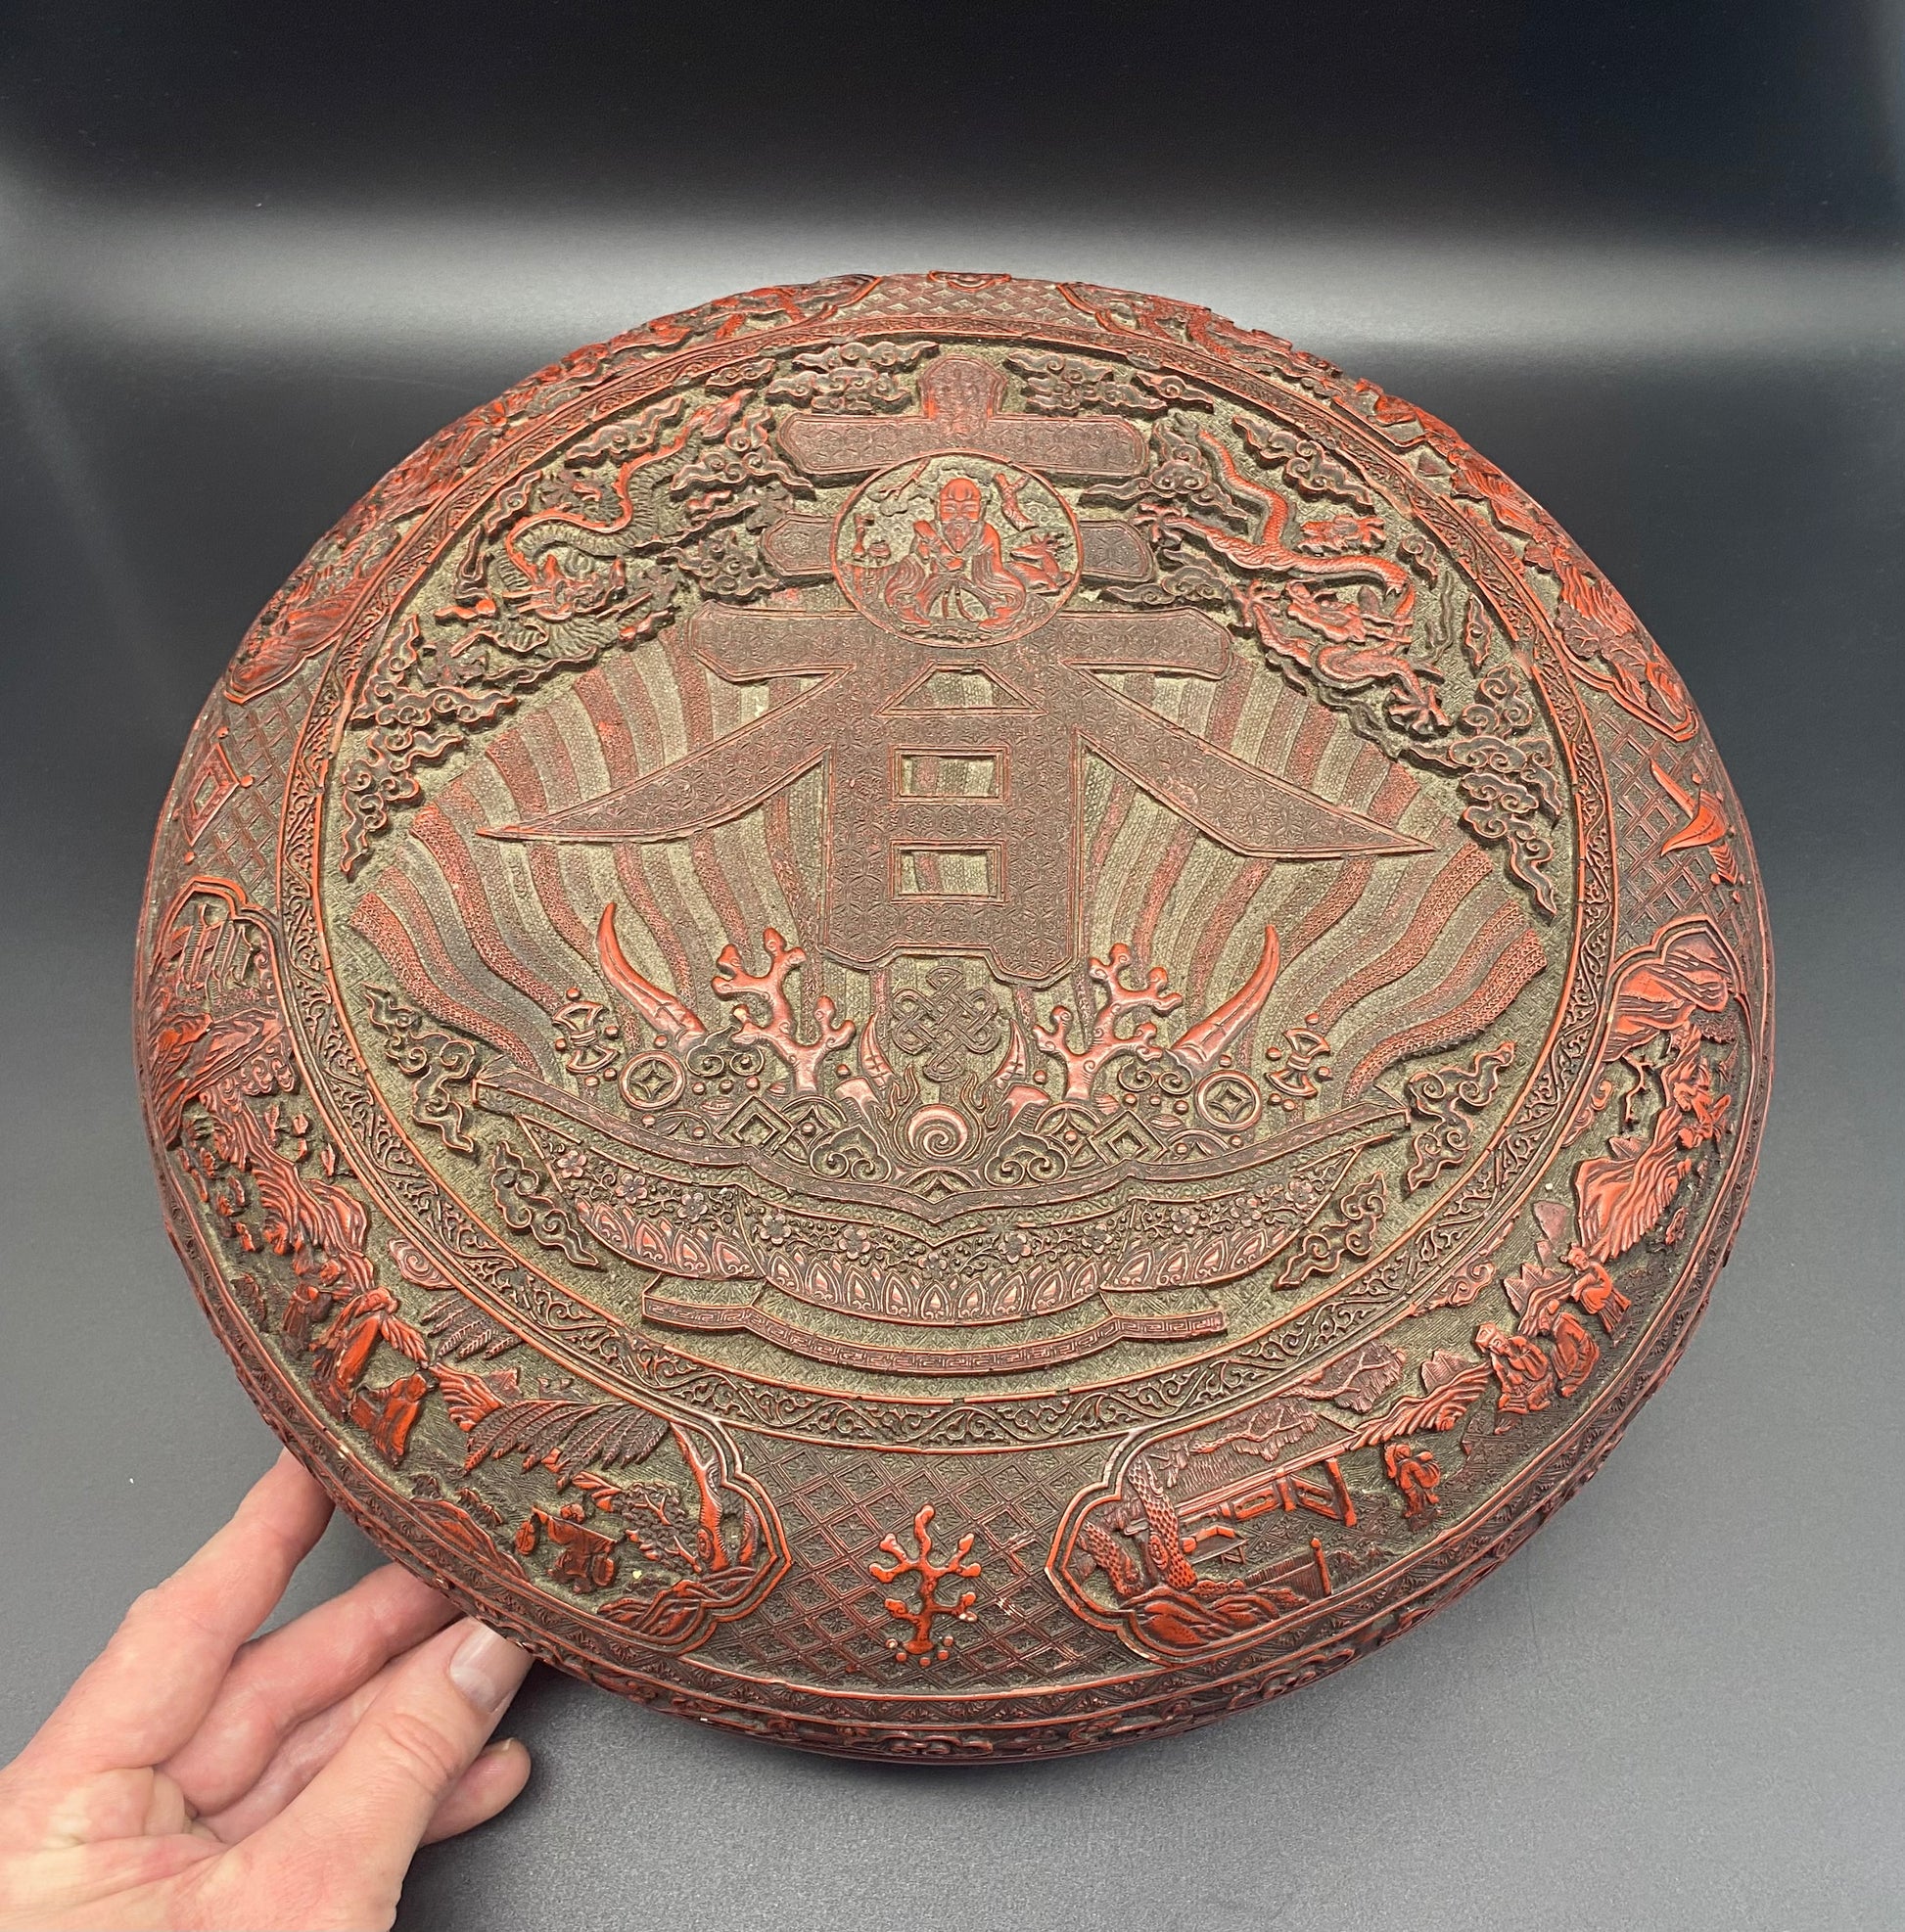 The carving of the bowl displays superb craftsmanship of the lacquer artist, with exquisite rendering of details of the many decorative elements typical of Qing lacquer wares